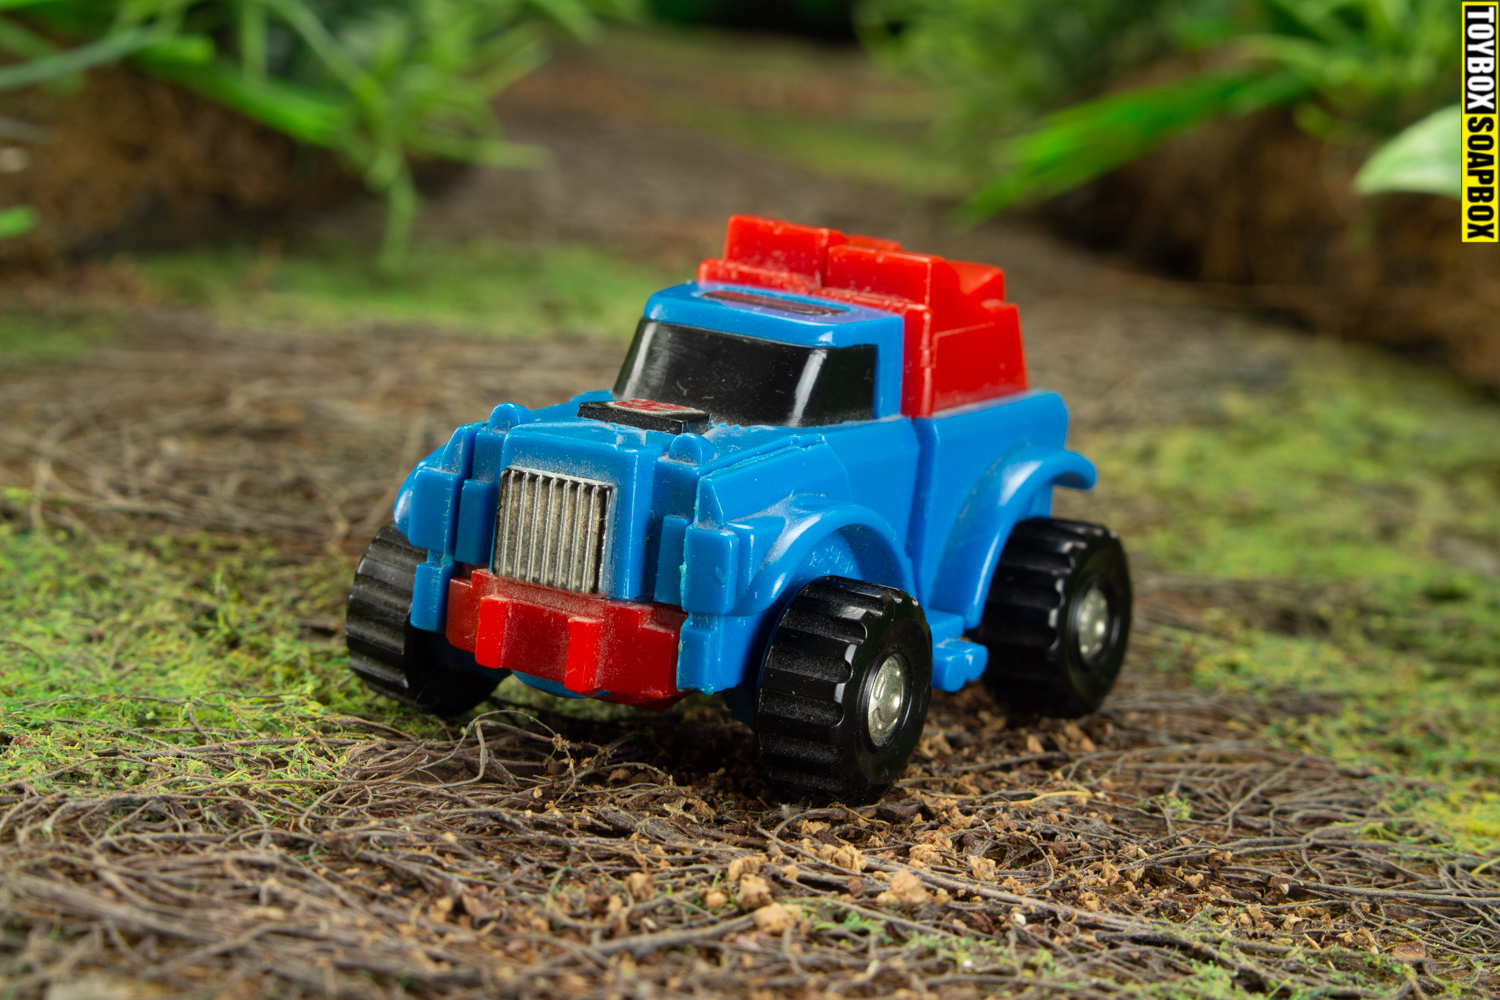 gears-g1-transformers-toy